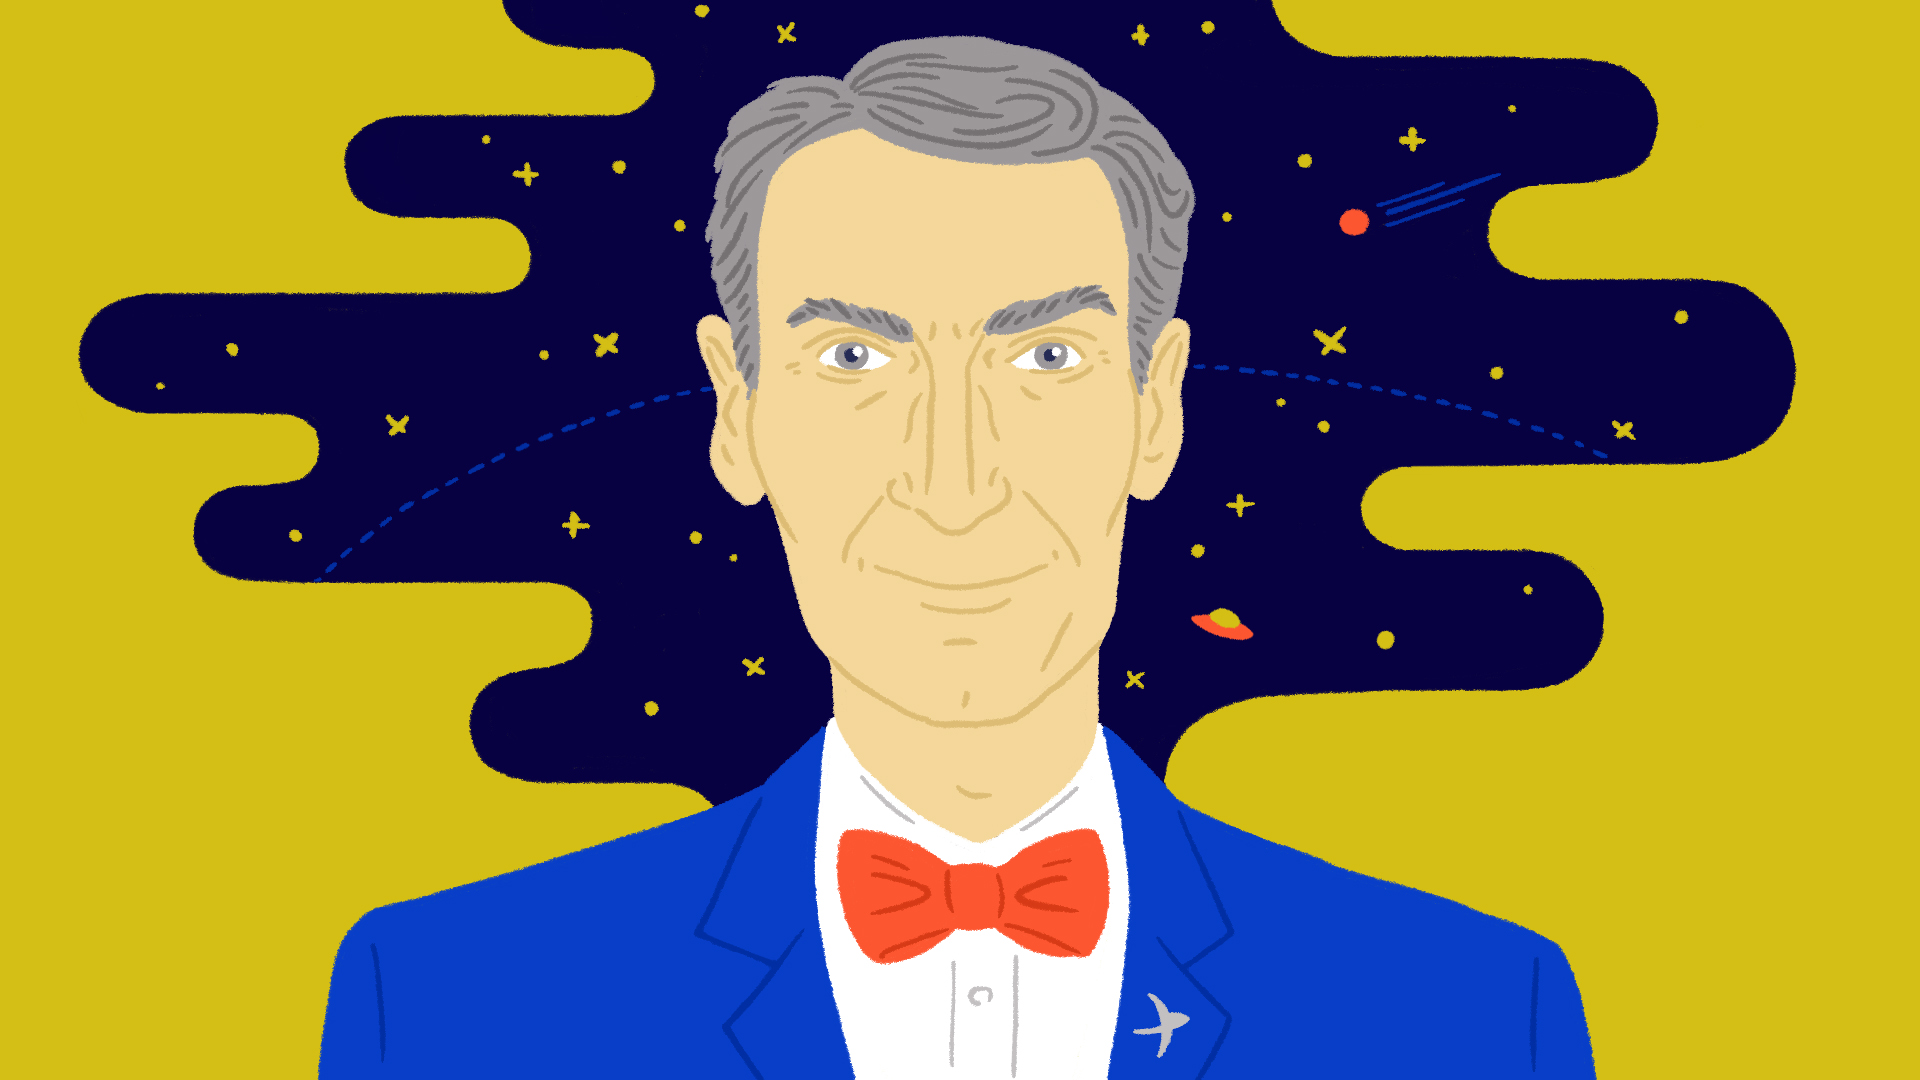 Bill Nye the Science Guy on the Nature of Regret